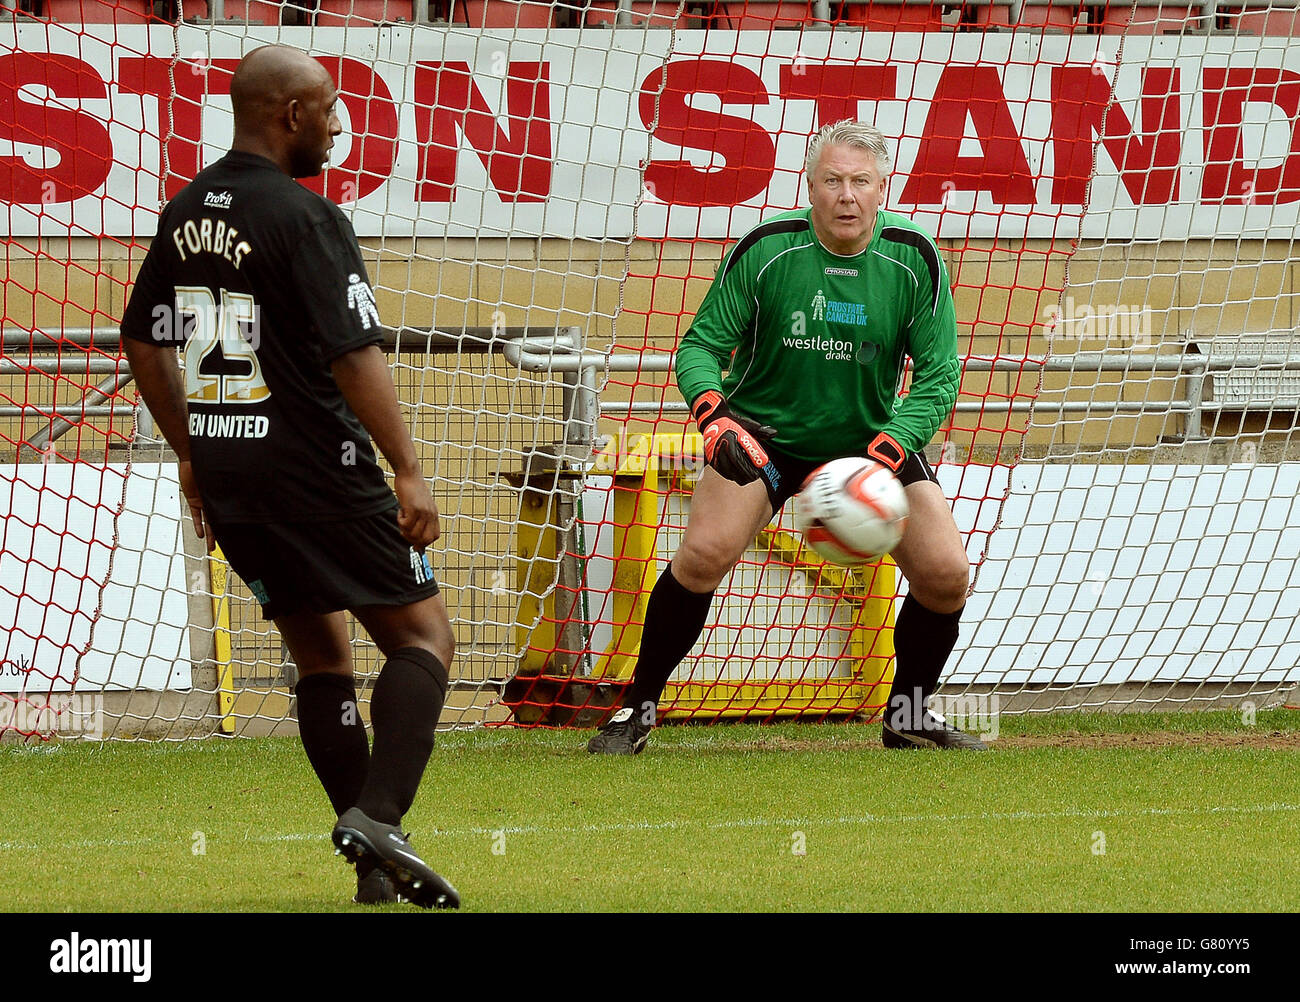 Men United team member TV builder Tommy Walsh (right) in action at the Leyton Orient Football Club, London, where Errol McKellar's Prostate Cancer UK charity match was played, in aid of Prostate Cancer UK. Stock Photo